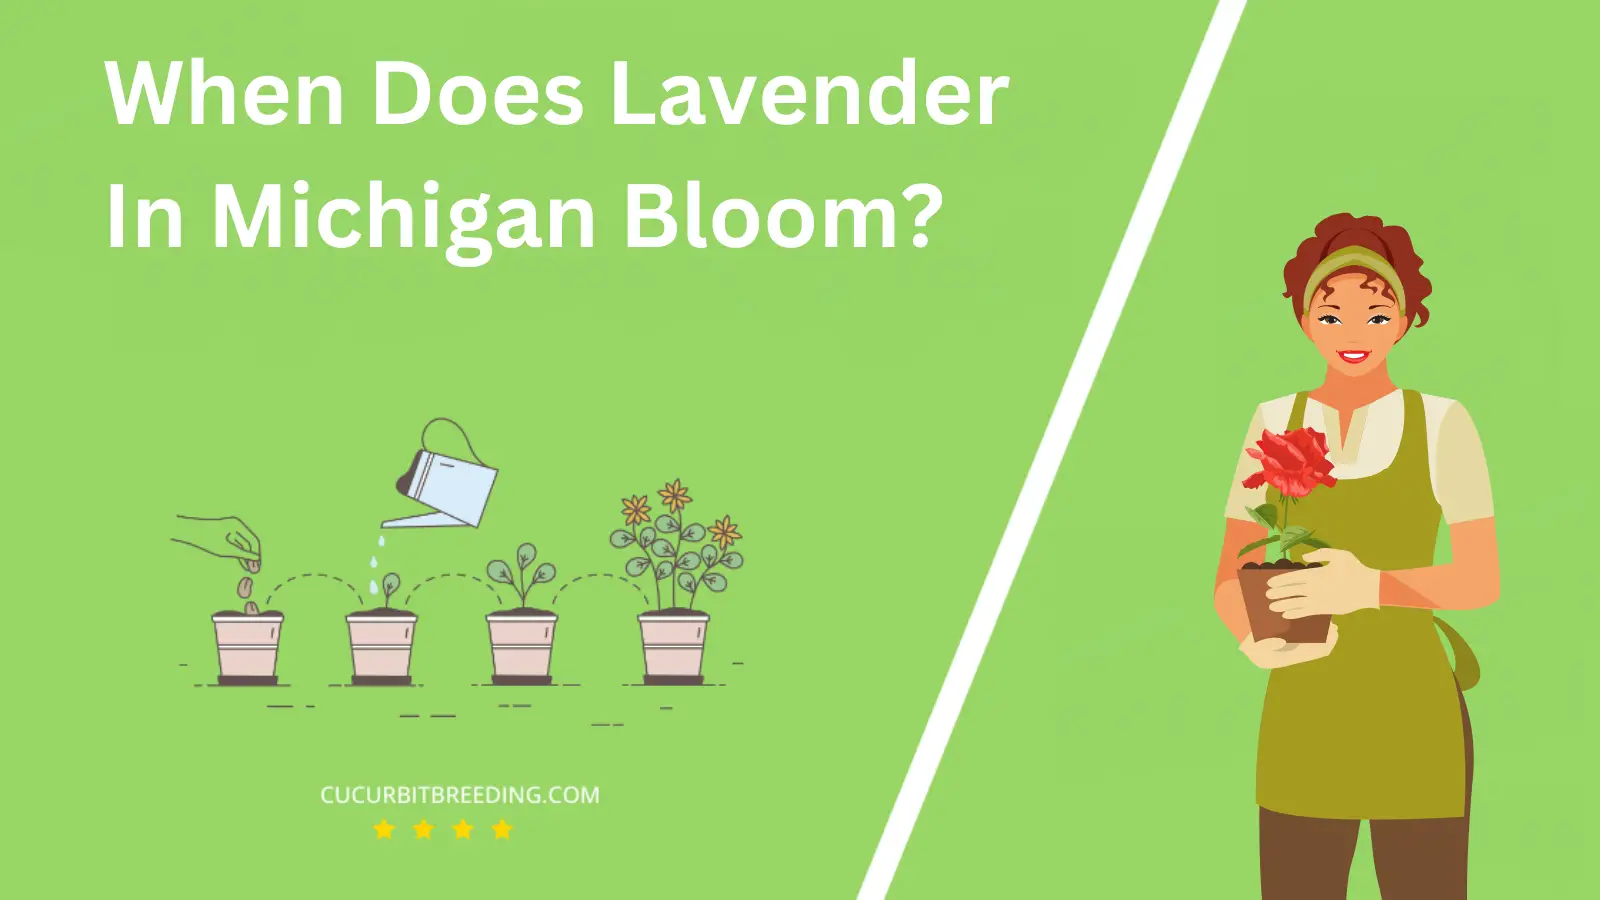 When Does Lavender In Michigan Bloom?